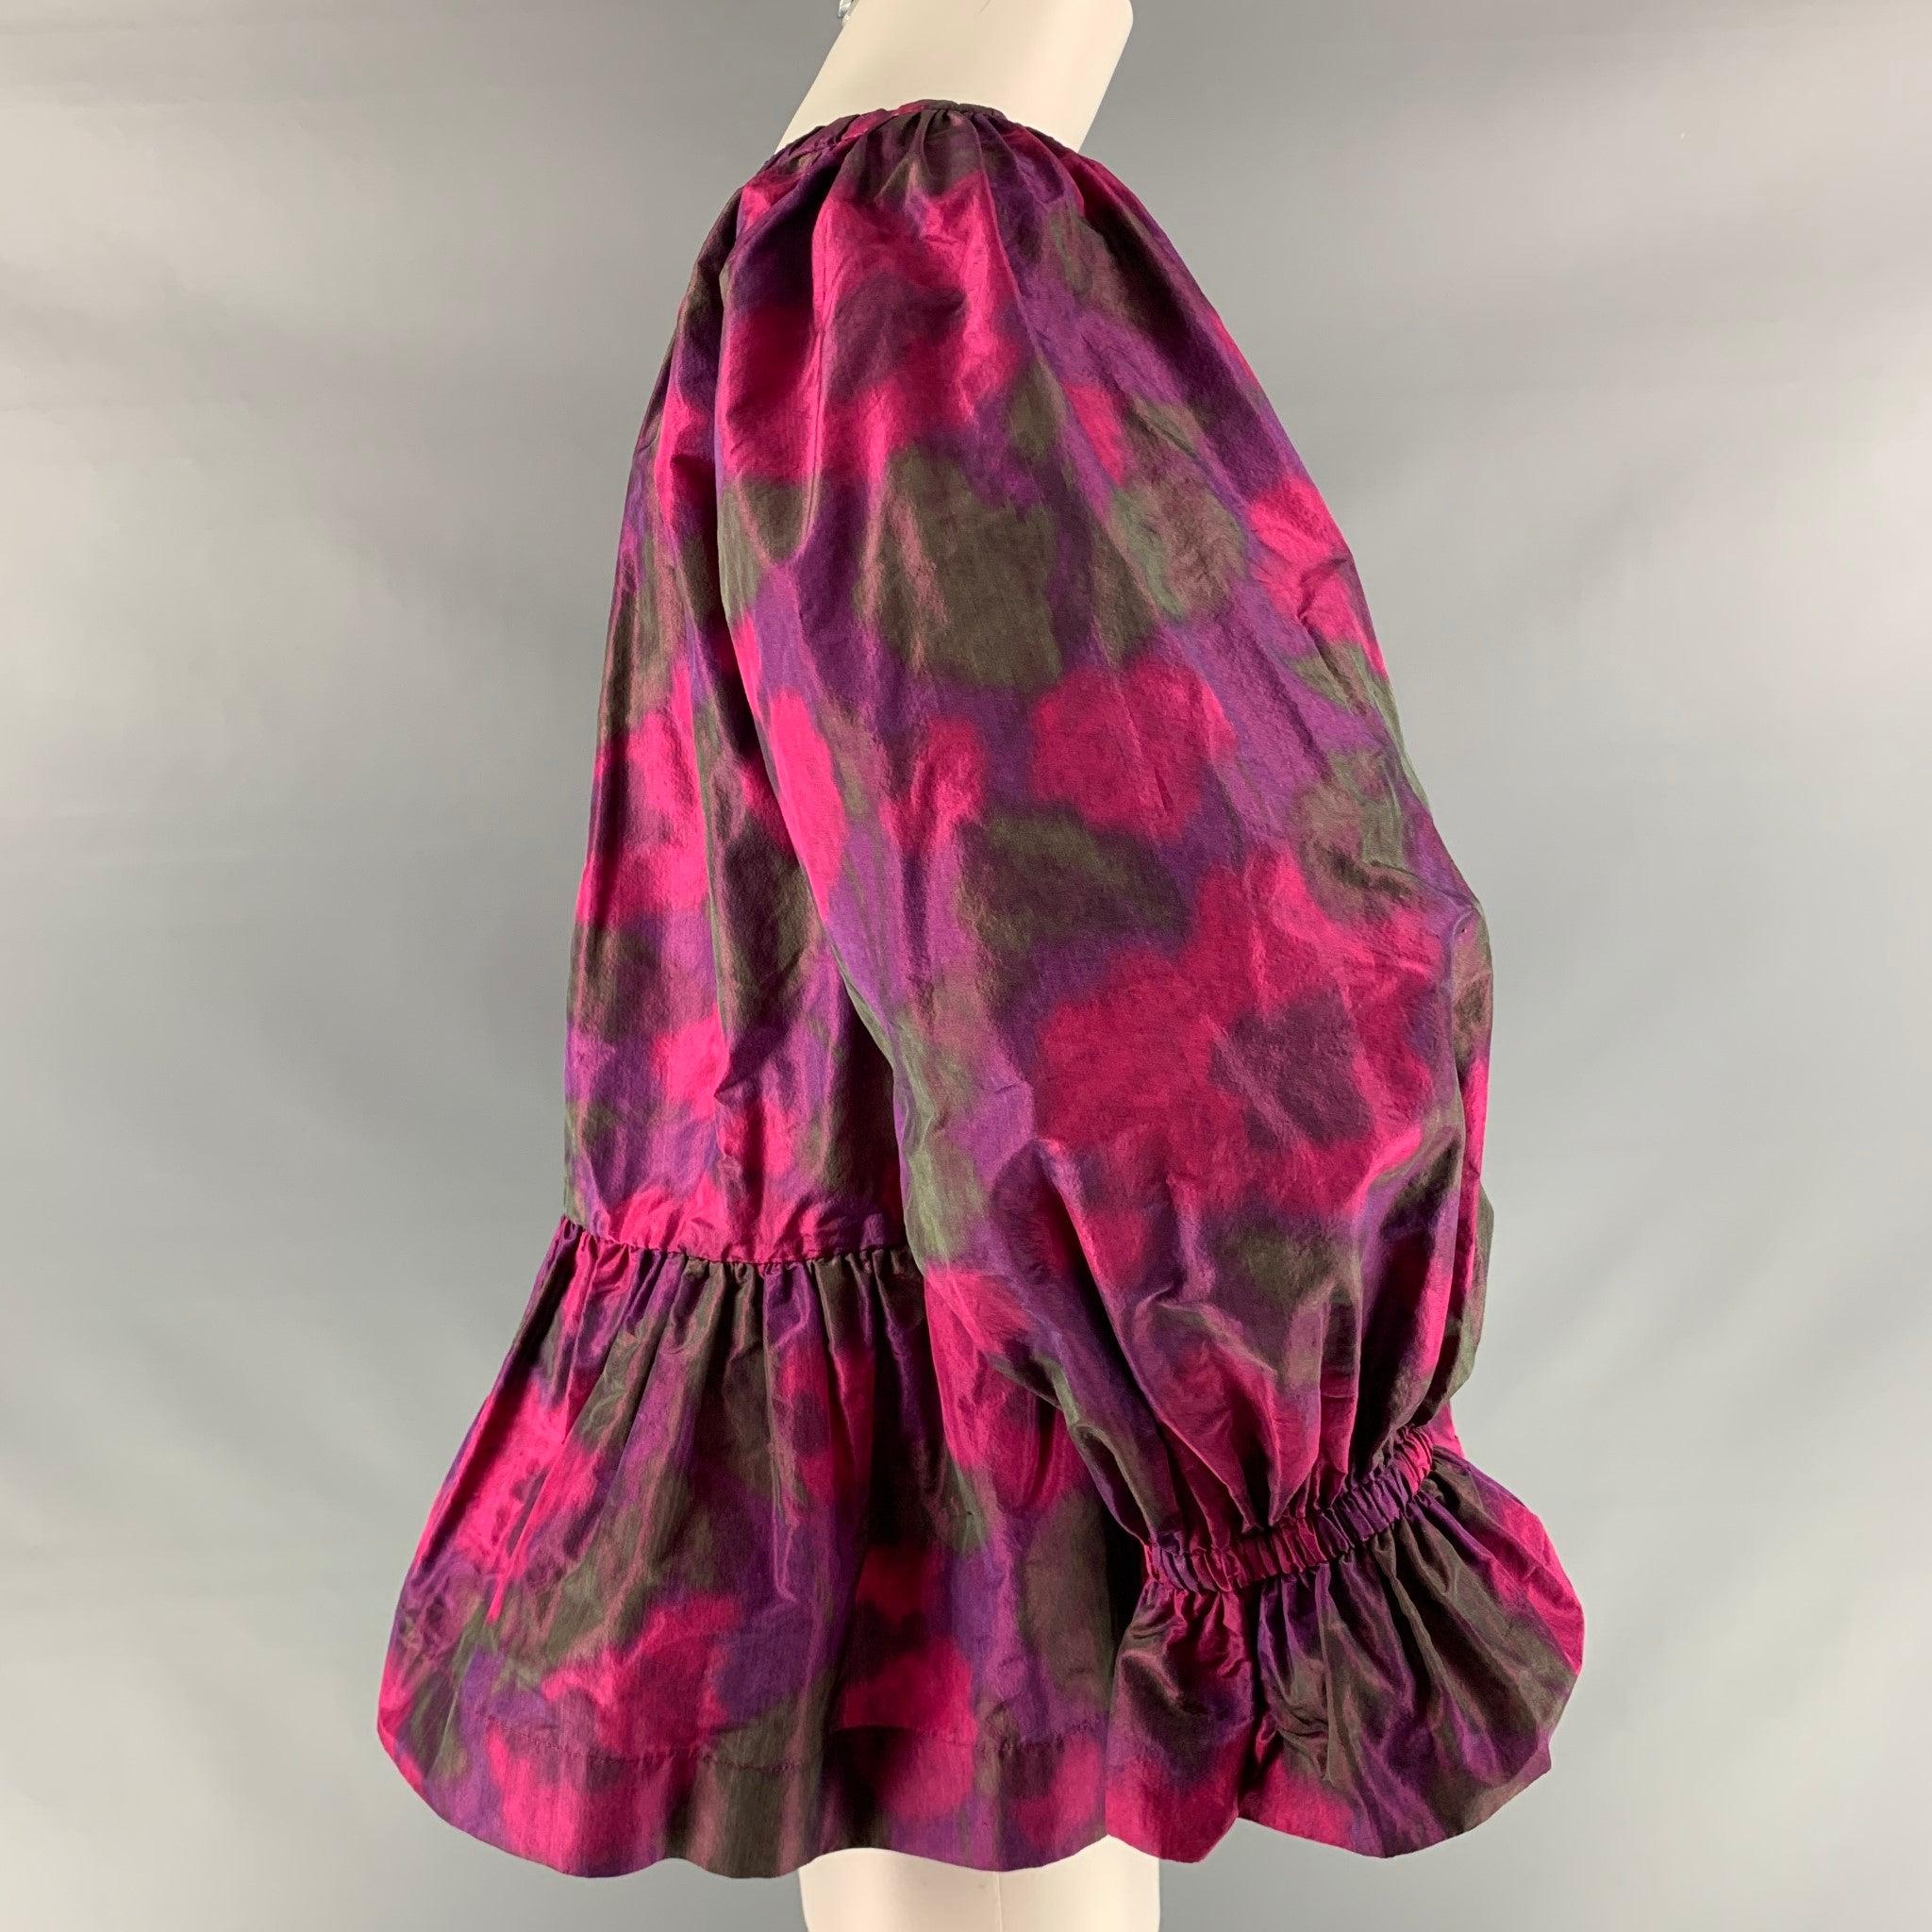 MARC JACOBS Runway blouse comes in pink and purple abstract print silk fabric featuring flared silhouette and ruffle detail at the sleeve cuff and bottom hem. Made in USA.Excellent Pre-Owned Condition. 

Marked:   12 

Measurements: 
 
Shoulder: 16